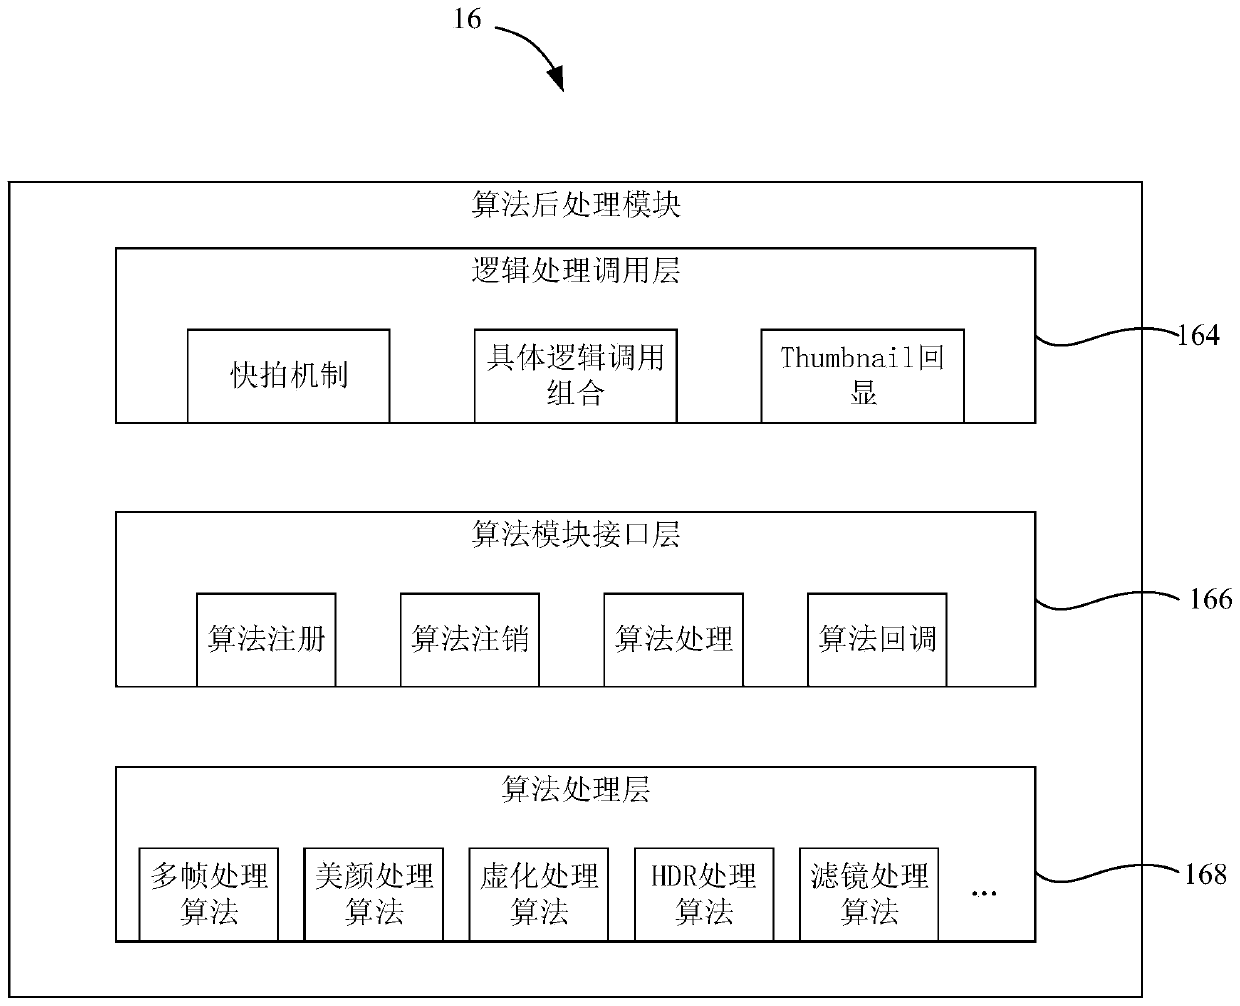 Image processor, image processing method, shooting device and electronic device